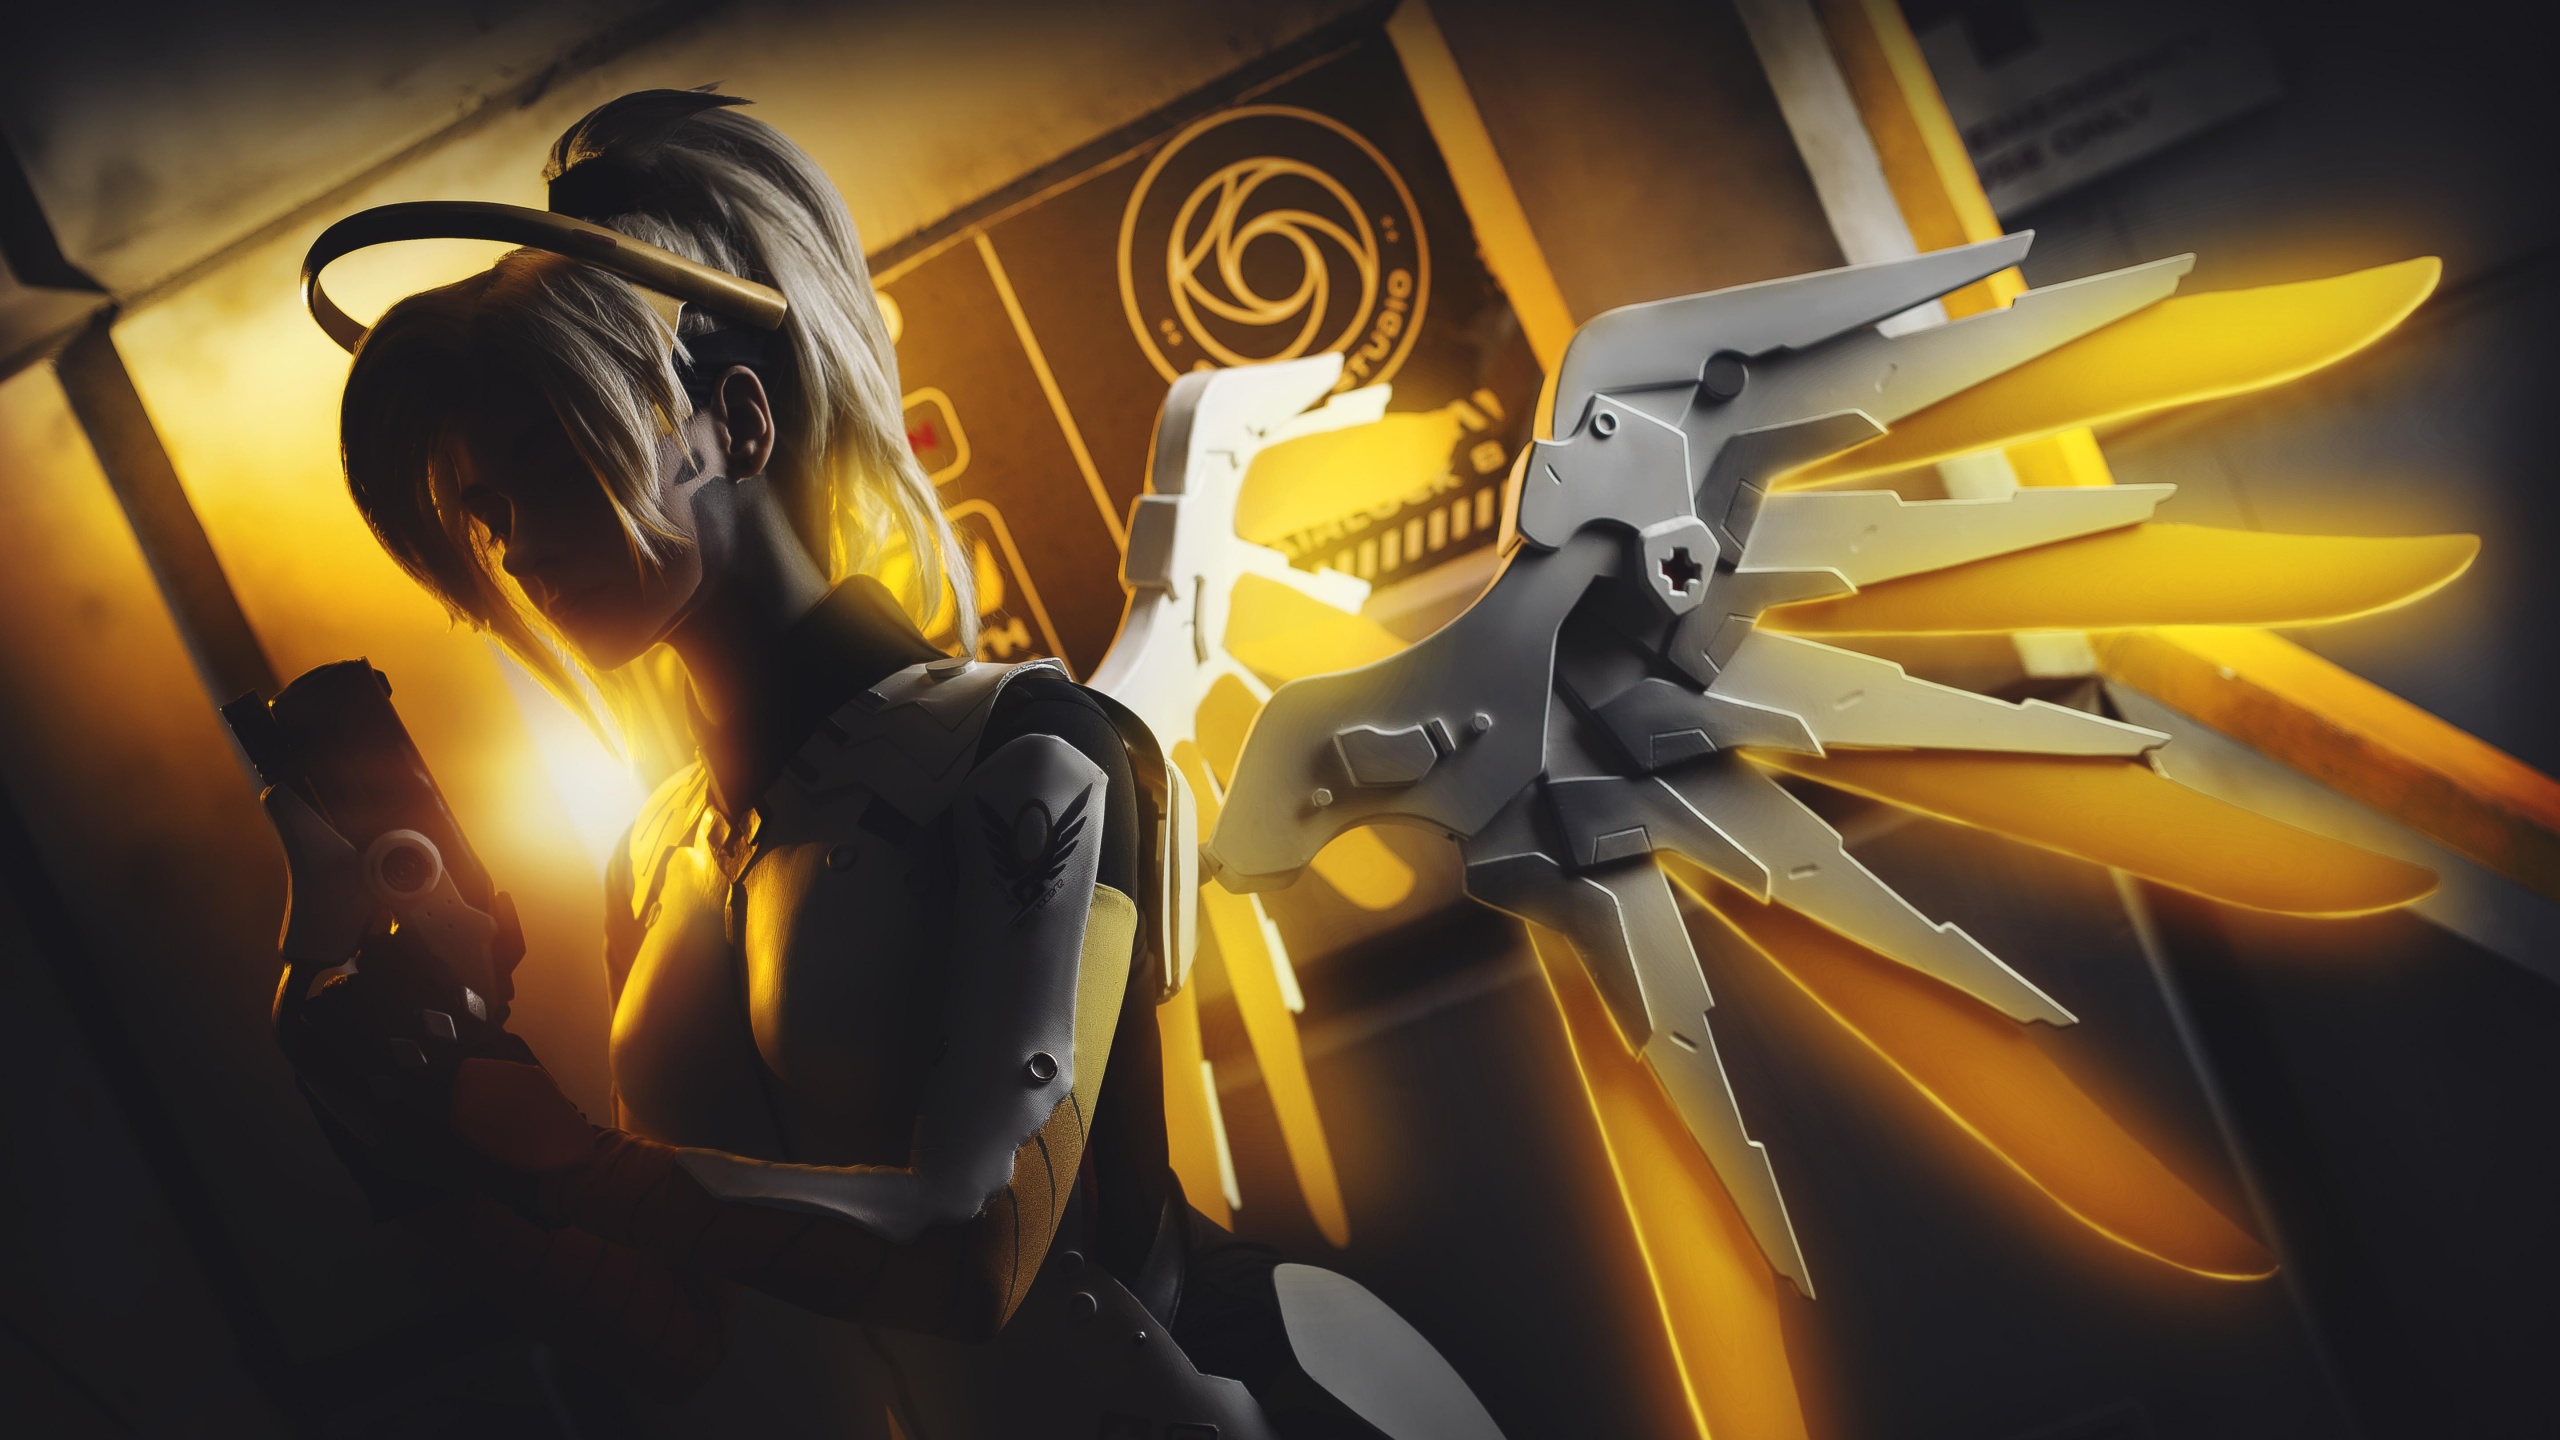 40 Overwatch Wallpapers HD 4K 5K for PC and Mobile  Download free  images for iPhone Android